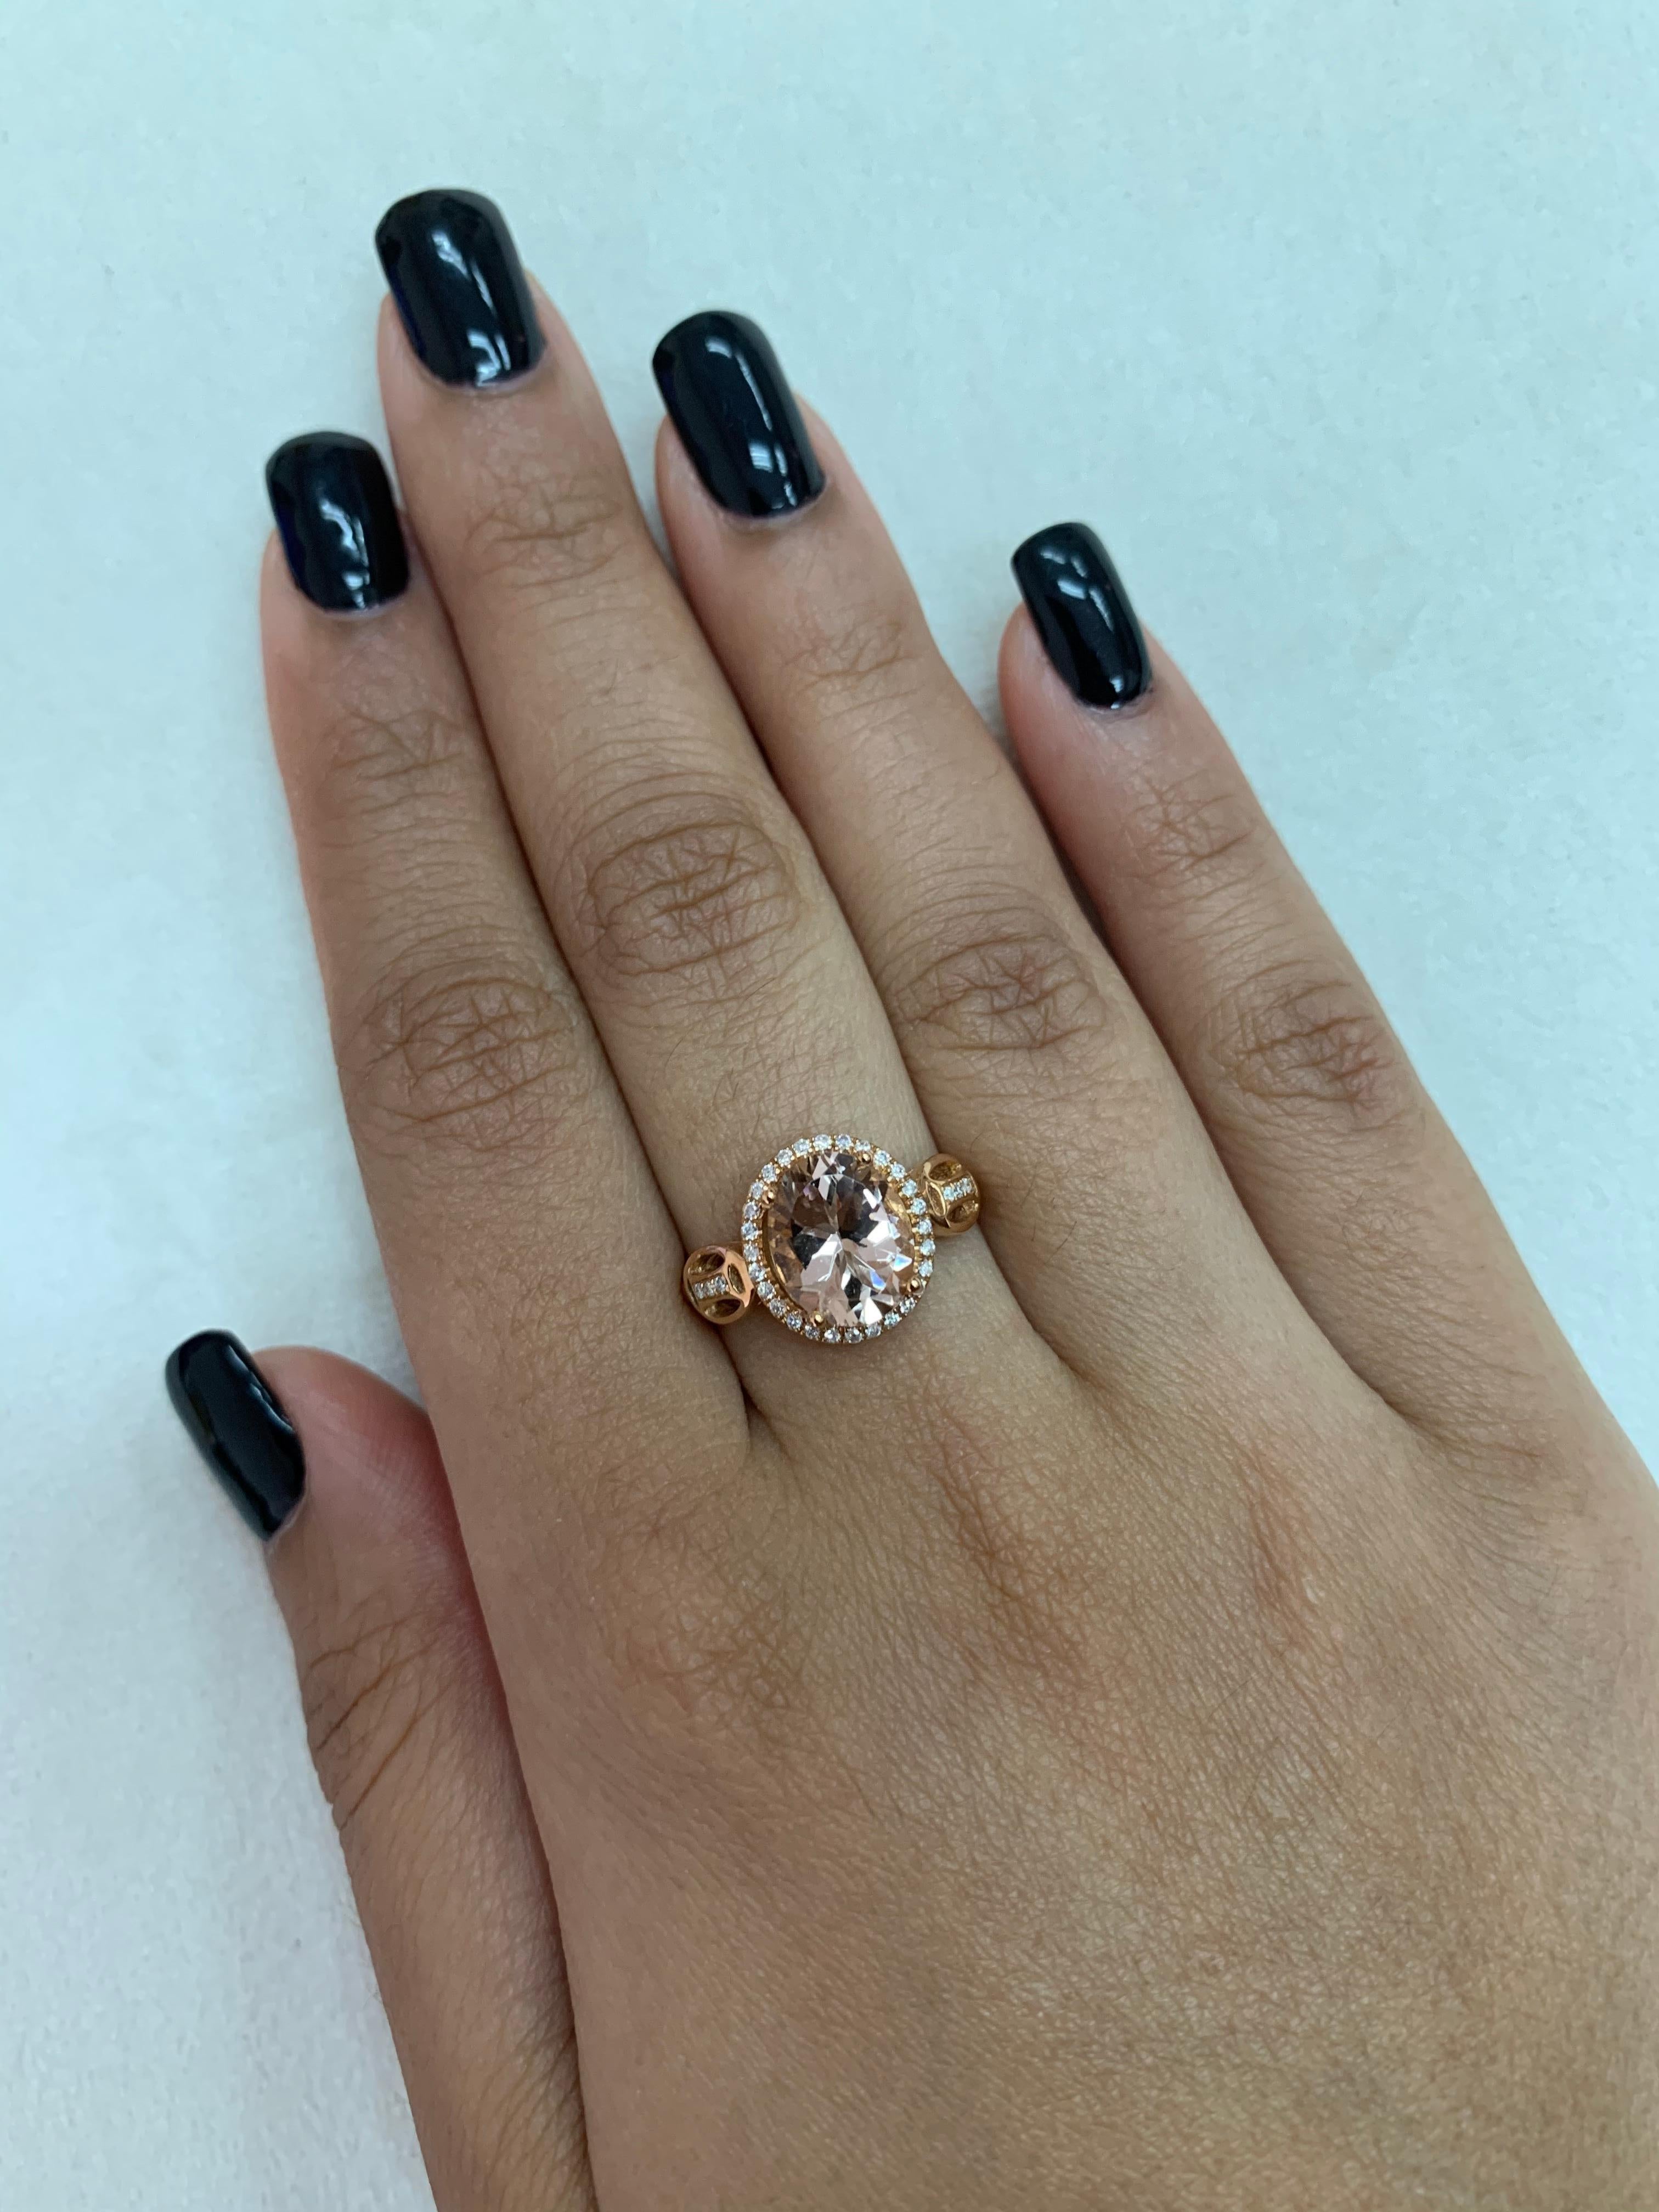 This collection features an array of magnificent morganites! Accented with diamonds these rings are made in rose gold and present a classic yet elegant look. 

Classic morganite ring in 18K rose gold with diamonds. 

Morganite: 2.4 carat oval